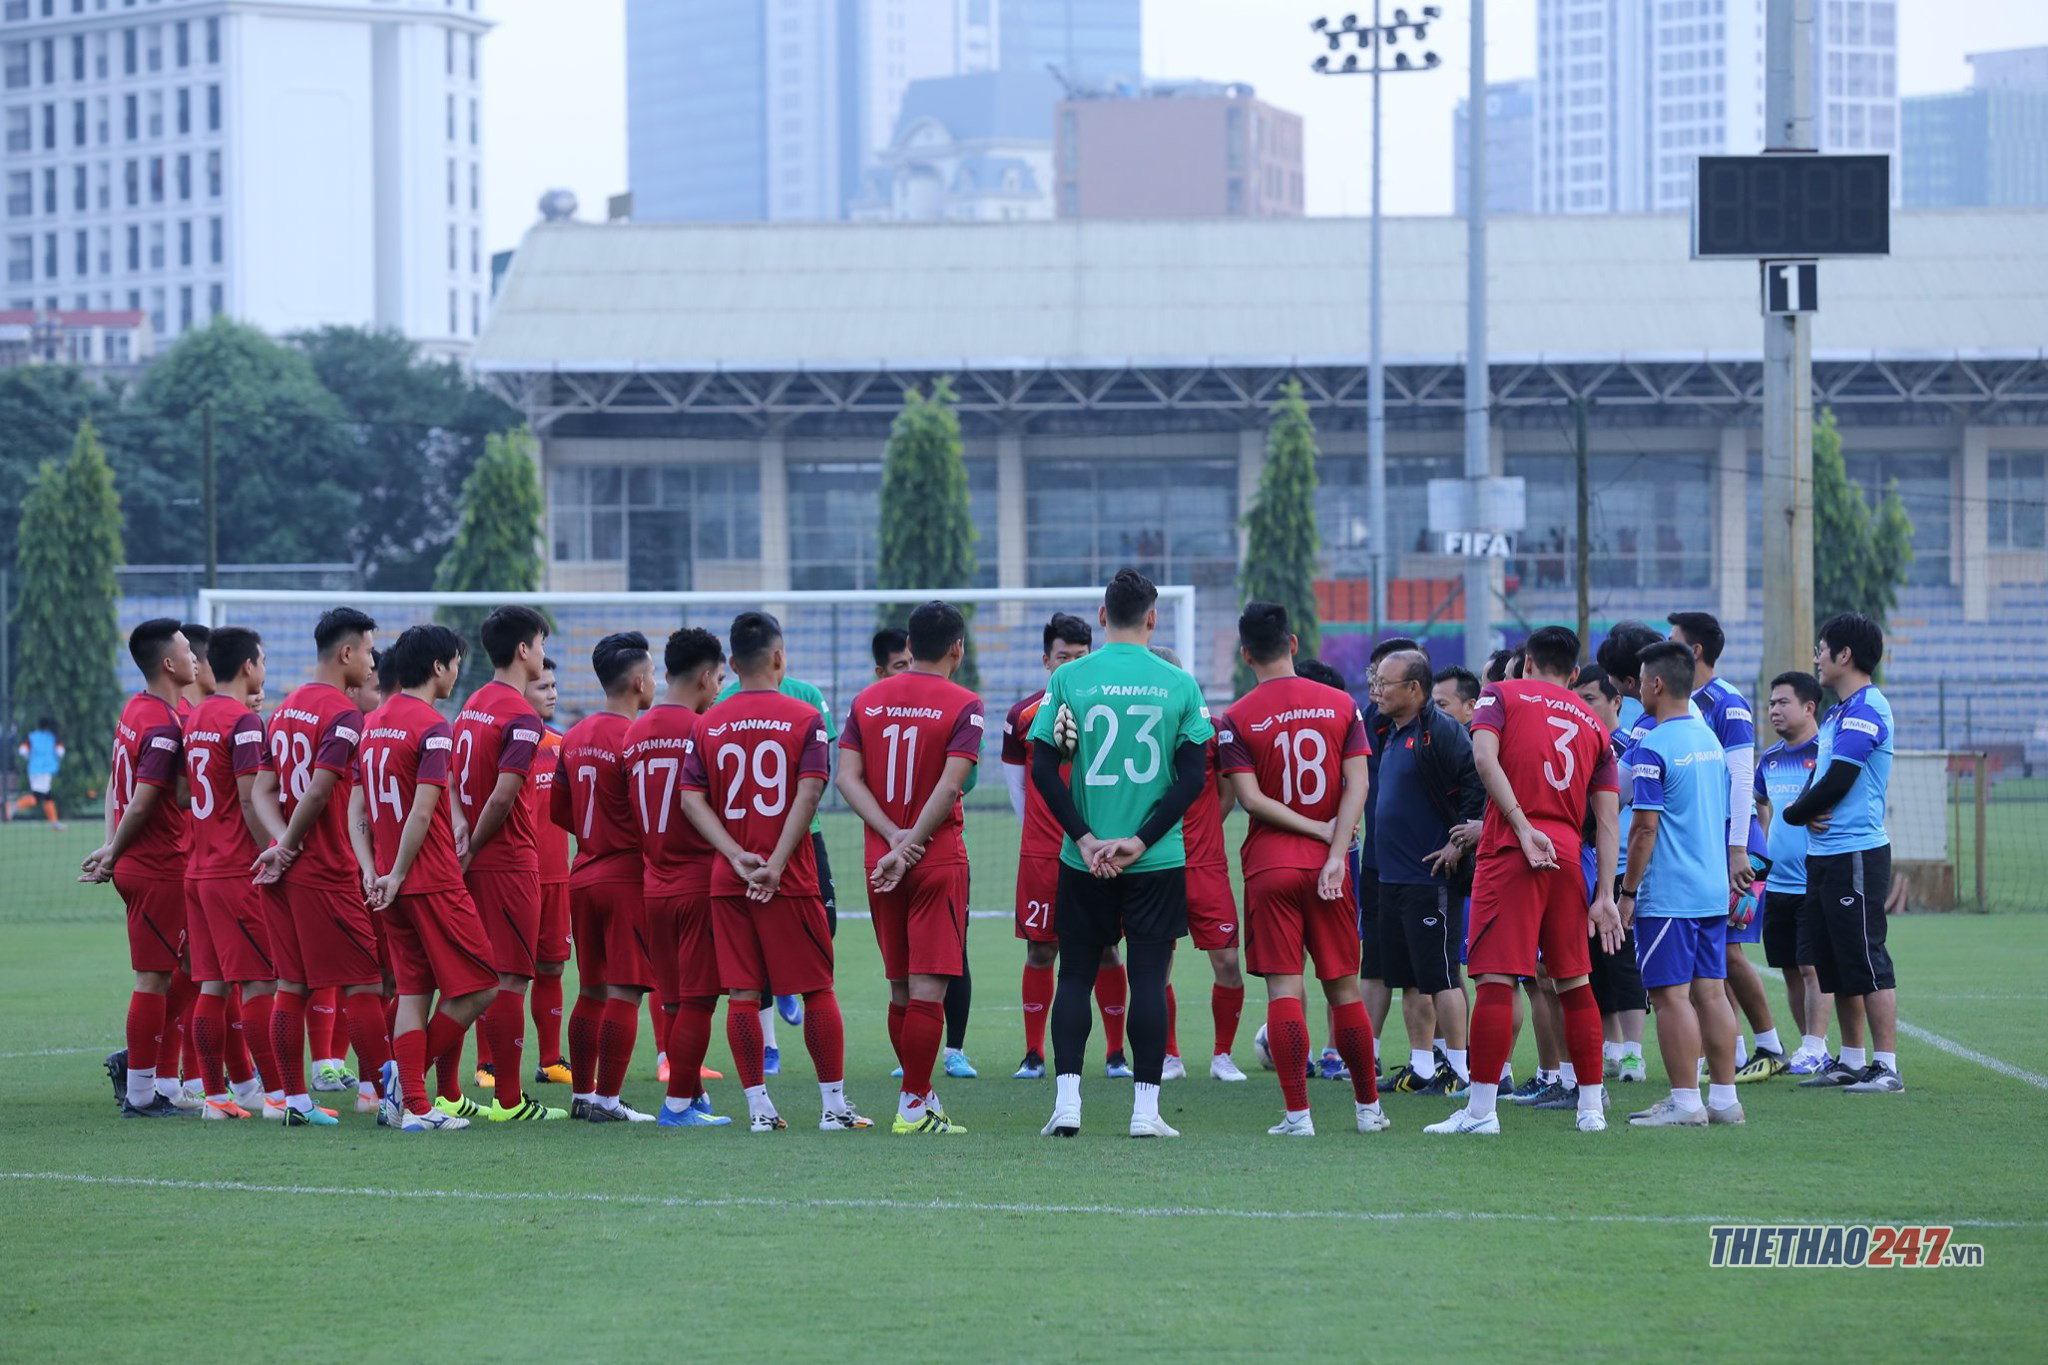 Vietnam's training session on Oct 8, world cup 2022 qualifiers